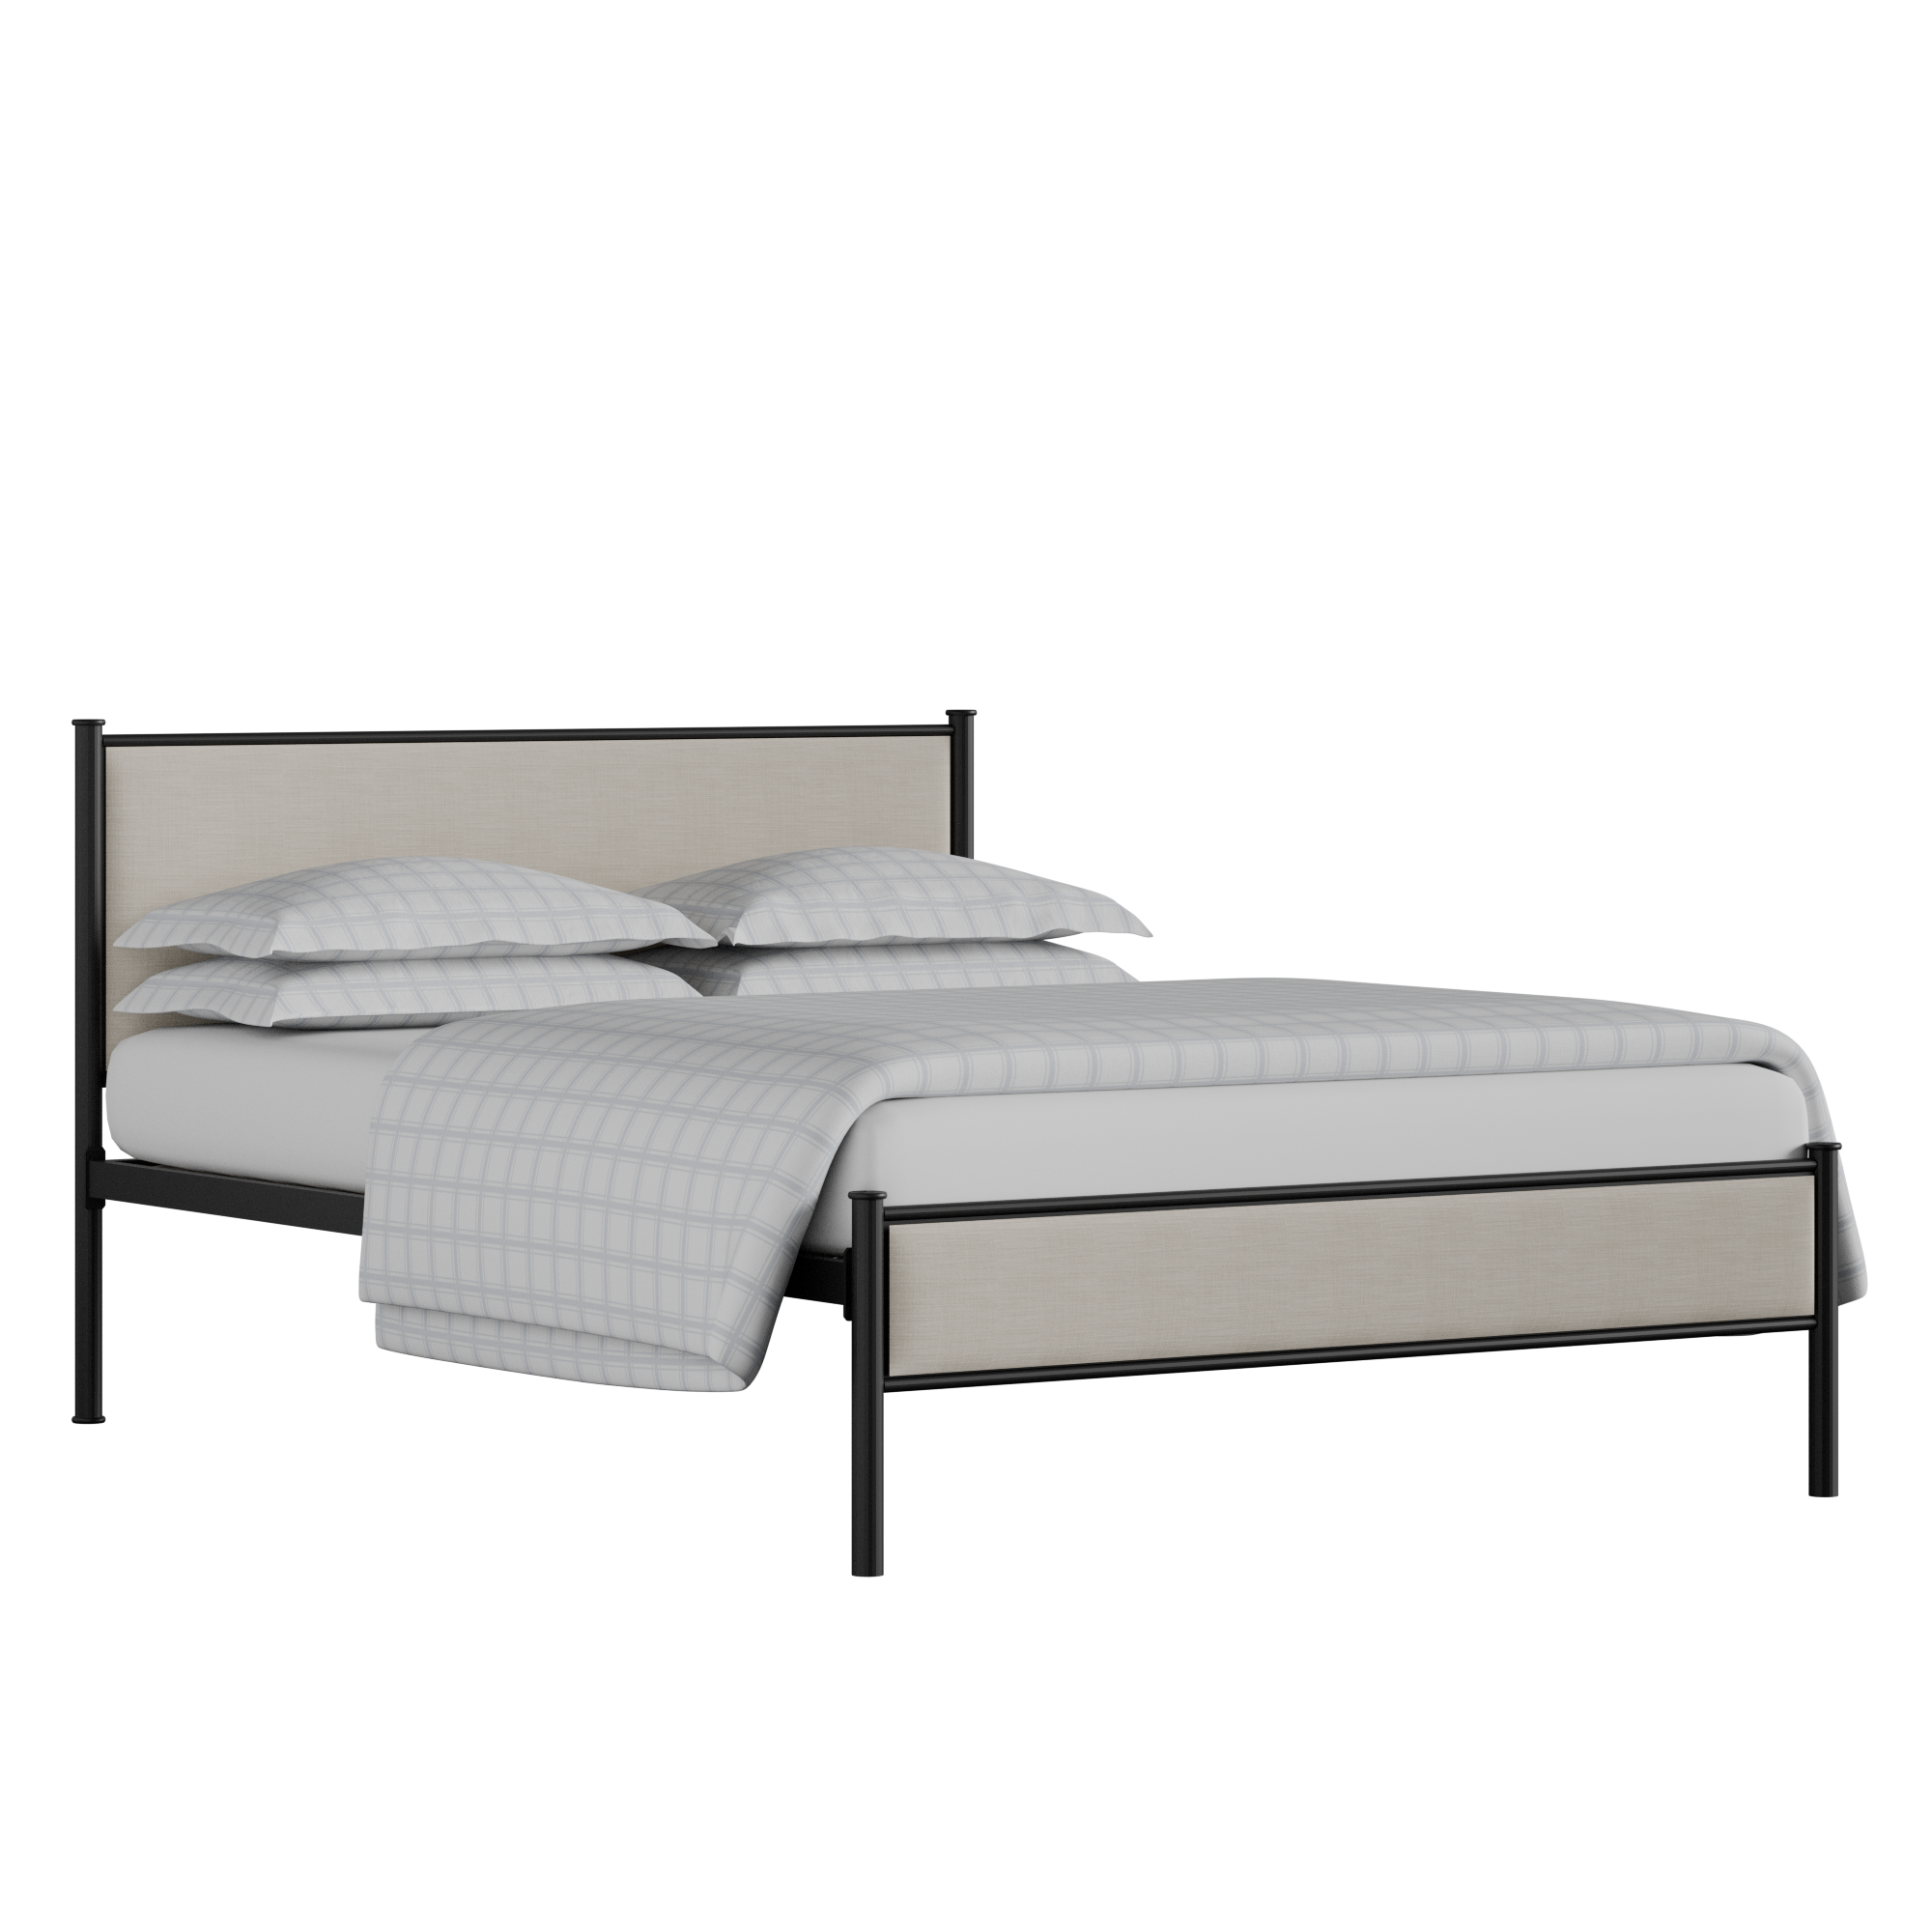 Brest iron/metal upholstered bed in black with mist fabric